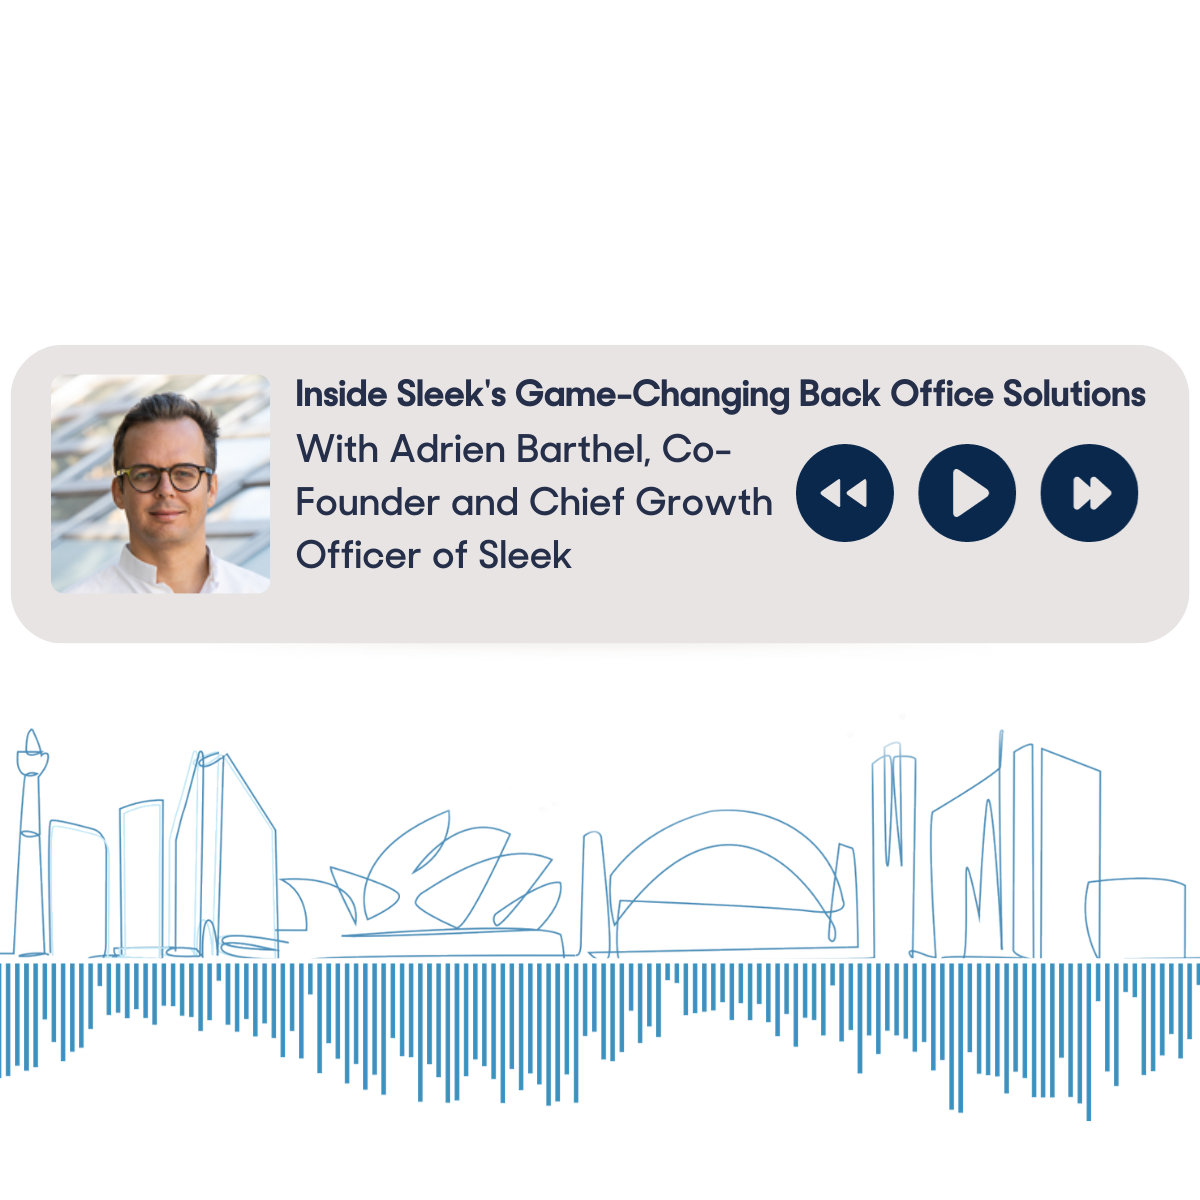 Inside Sleek's Game-Changing Back Office Solutions With Adrien Barthel, Co-Founder and Chief Growth Officer of Sleek